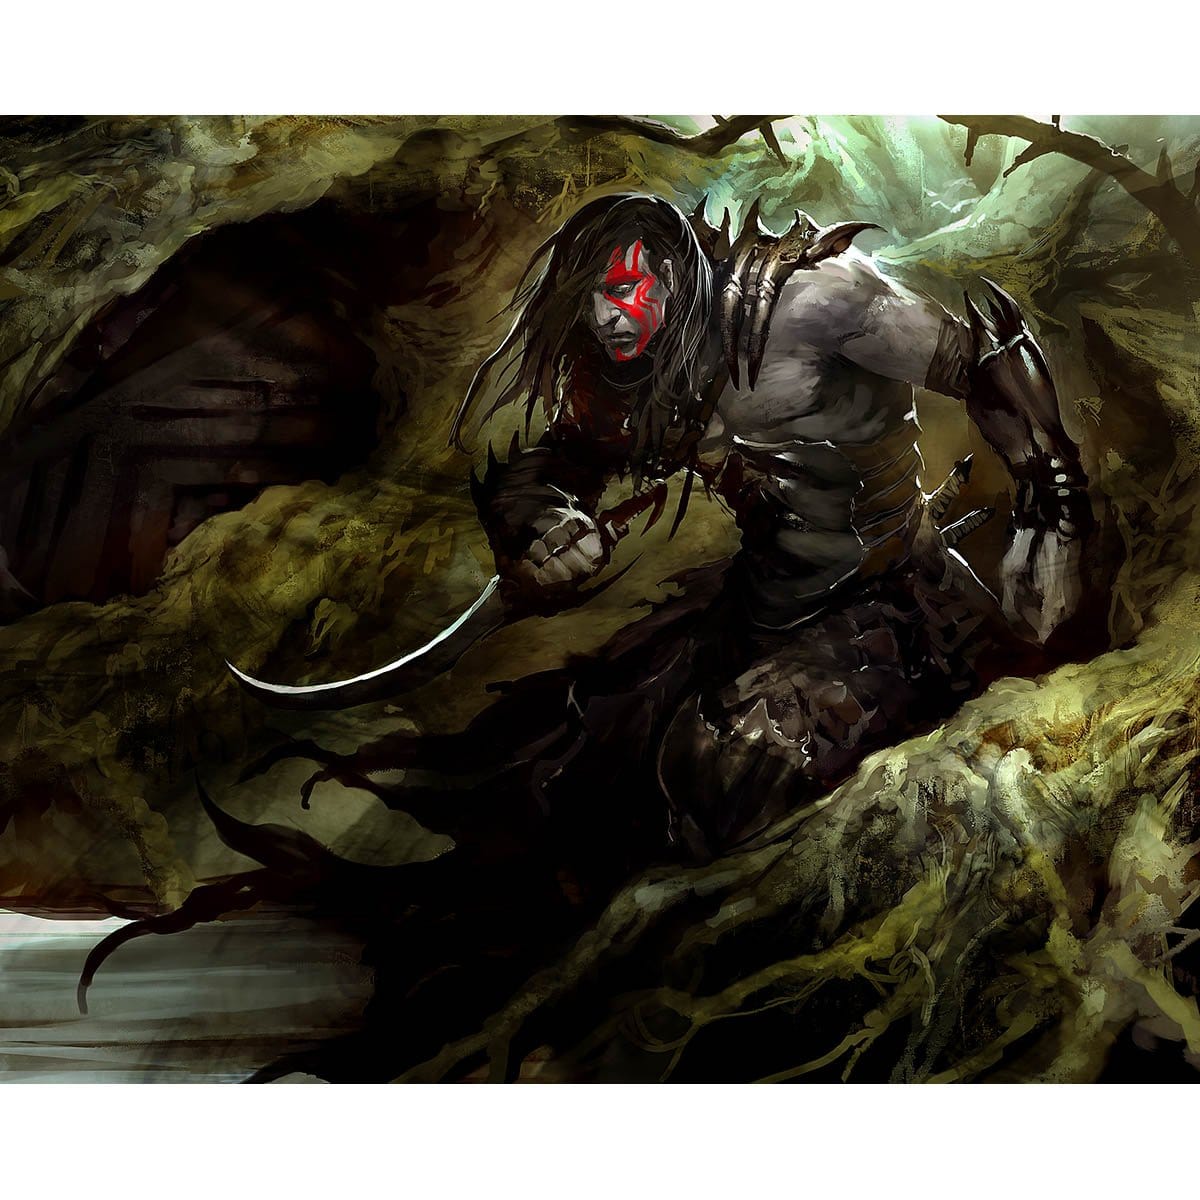 Vampire Token Print - Print - Original Magic Art - Accessories for Magic the Gathering and other card games